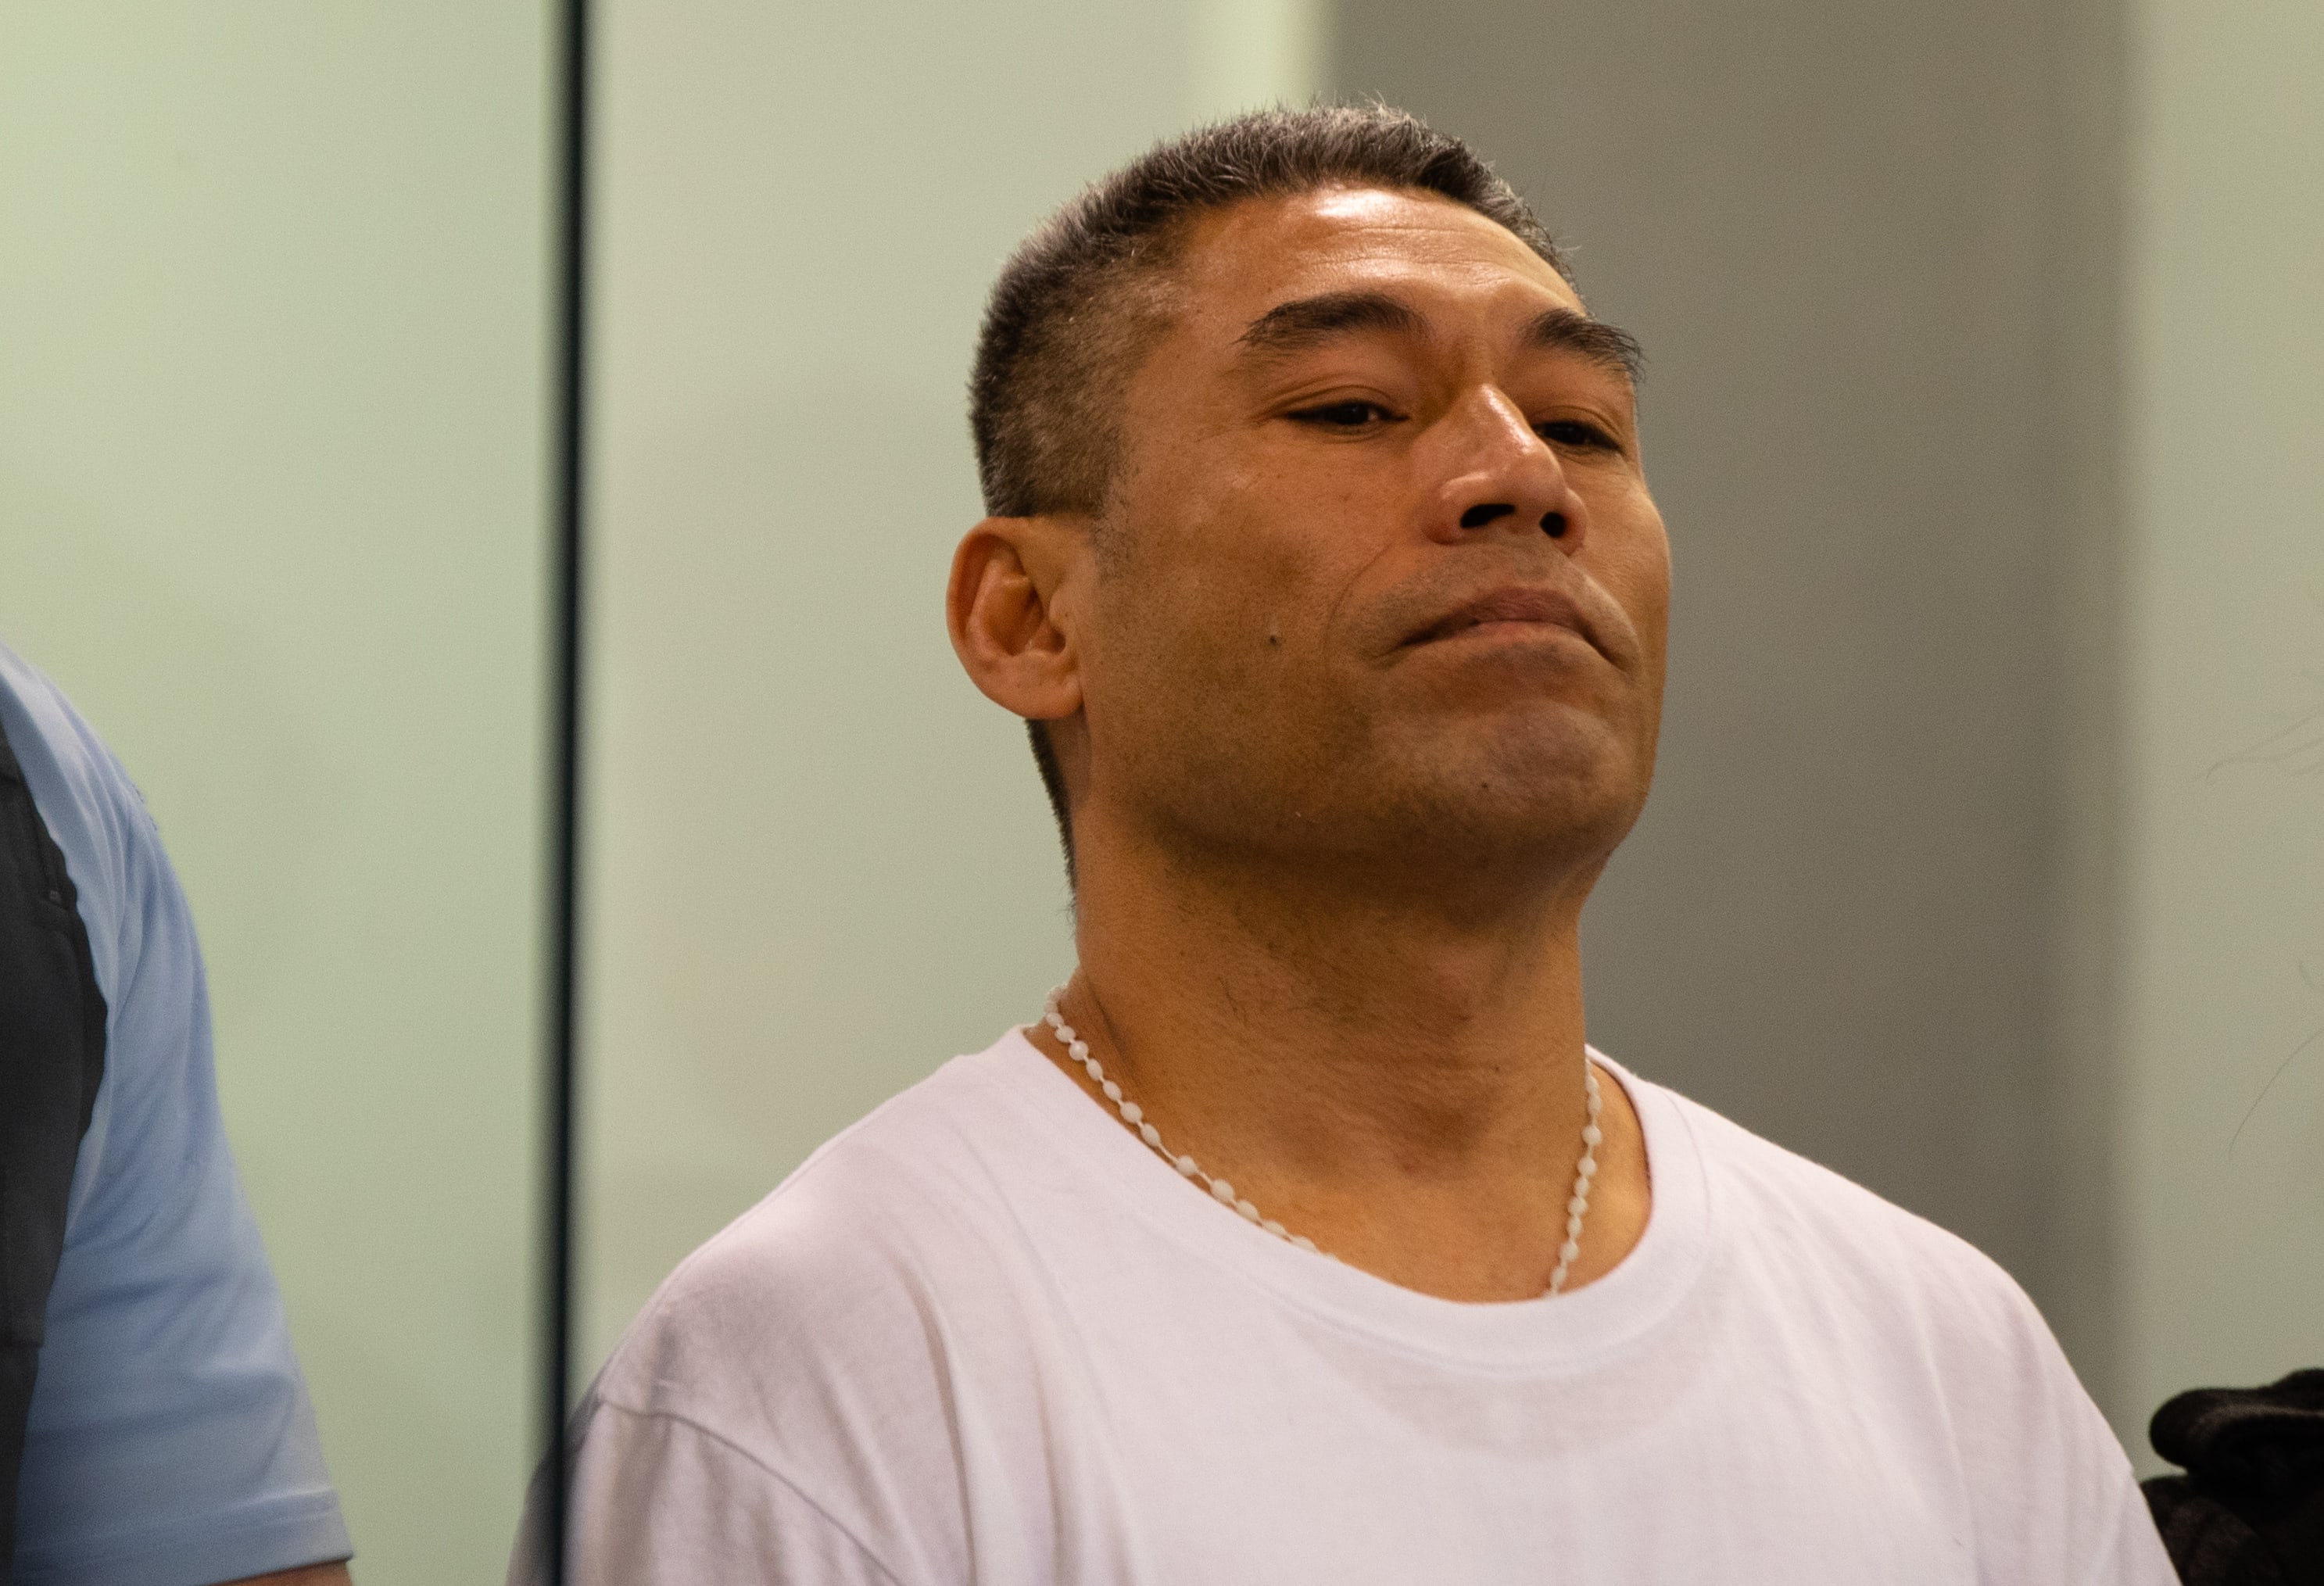 Ueta Vea pleaded guilty to a charge of murdering Laulimu Liuasi after he suspected the church handyman was having an affair with his wife.